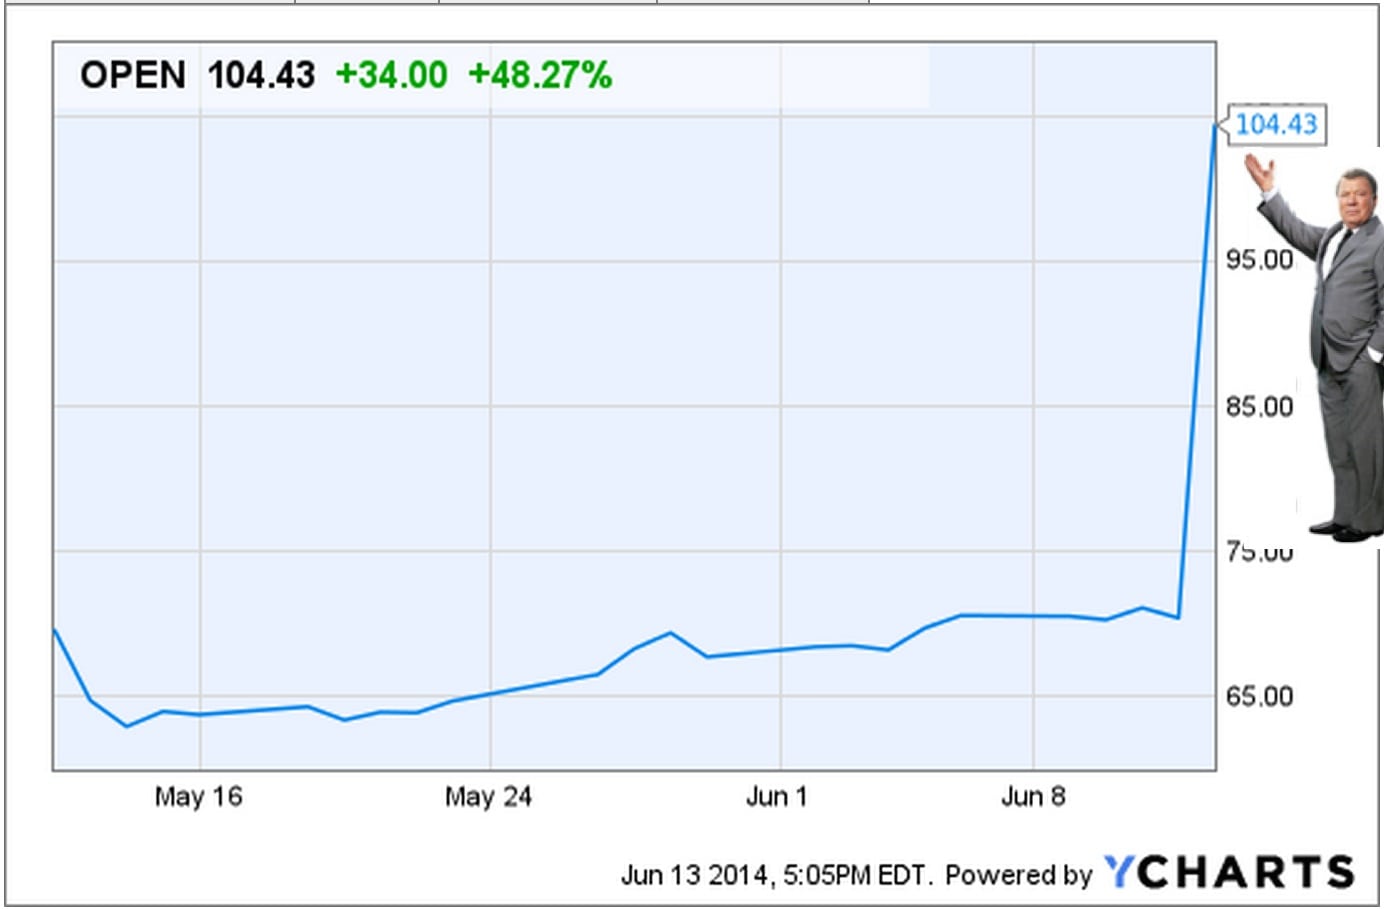 OpenTable's stock performance over the last month. 